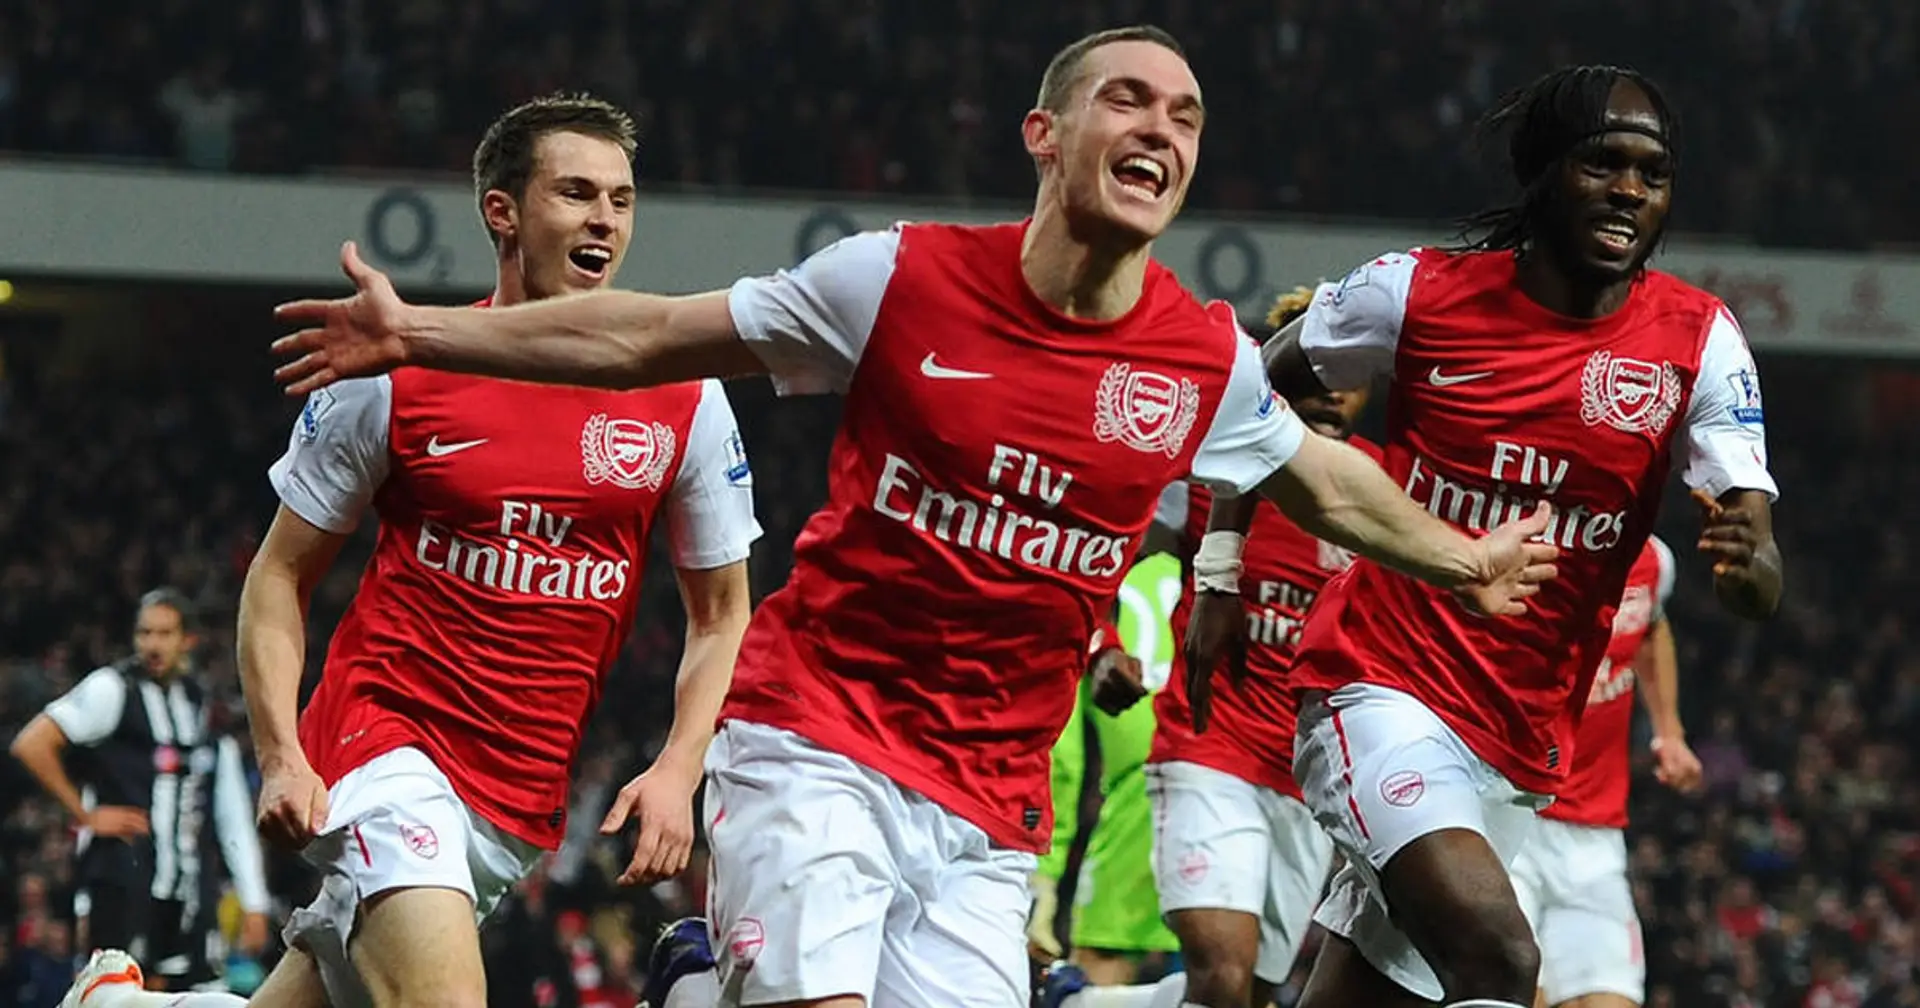 'I didn't think, I just scored': Thomas Vermaelen opens up on greatest moment of his Arsenal career